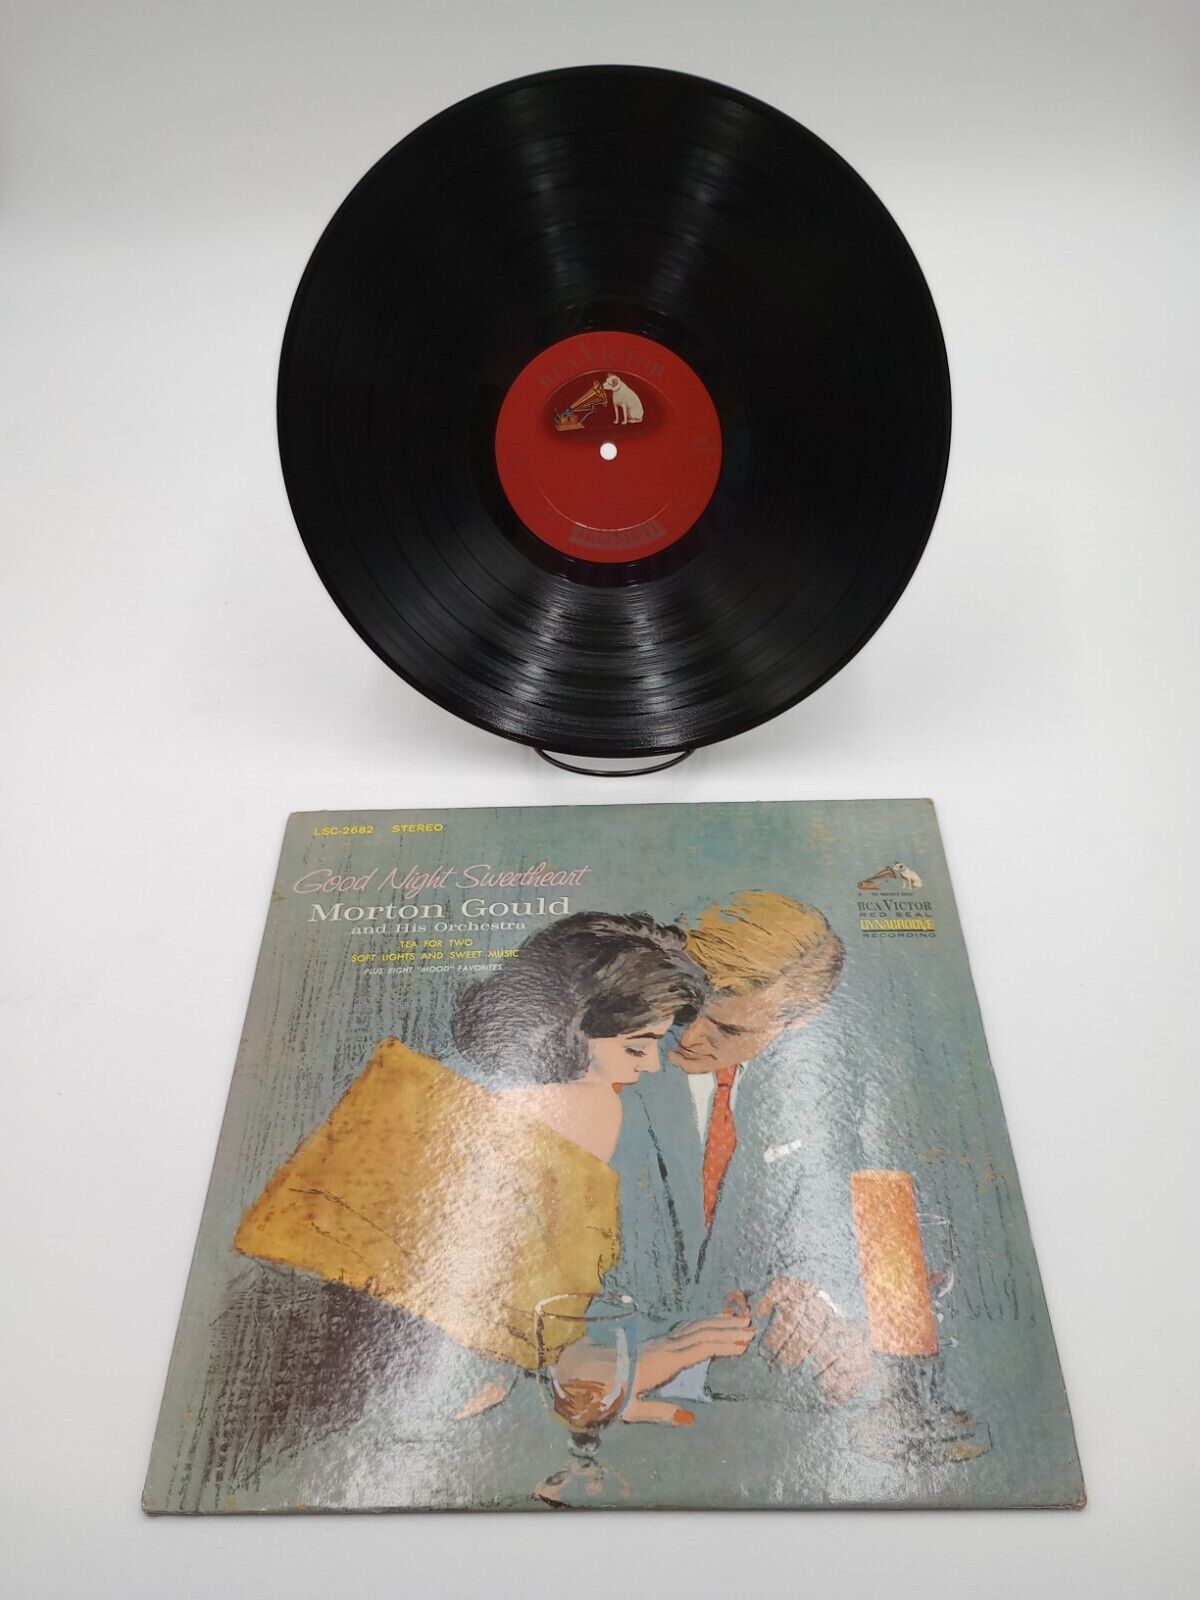 BOXDG35 Morton Gould And His Orchestra - Good Night Sweetheart LP RCA Victor Red